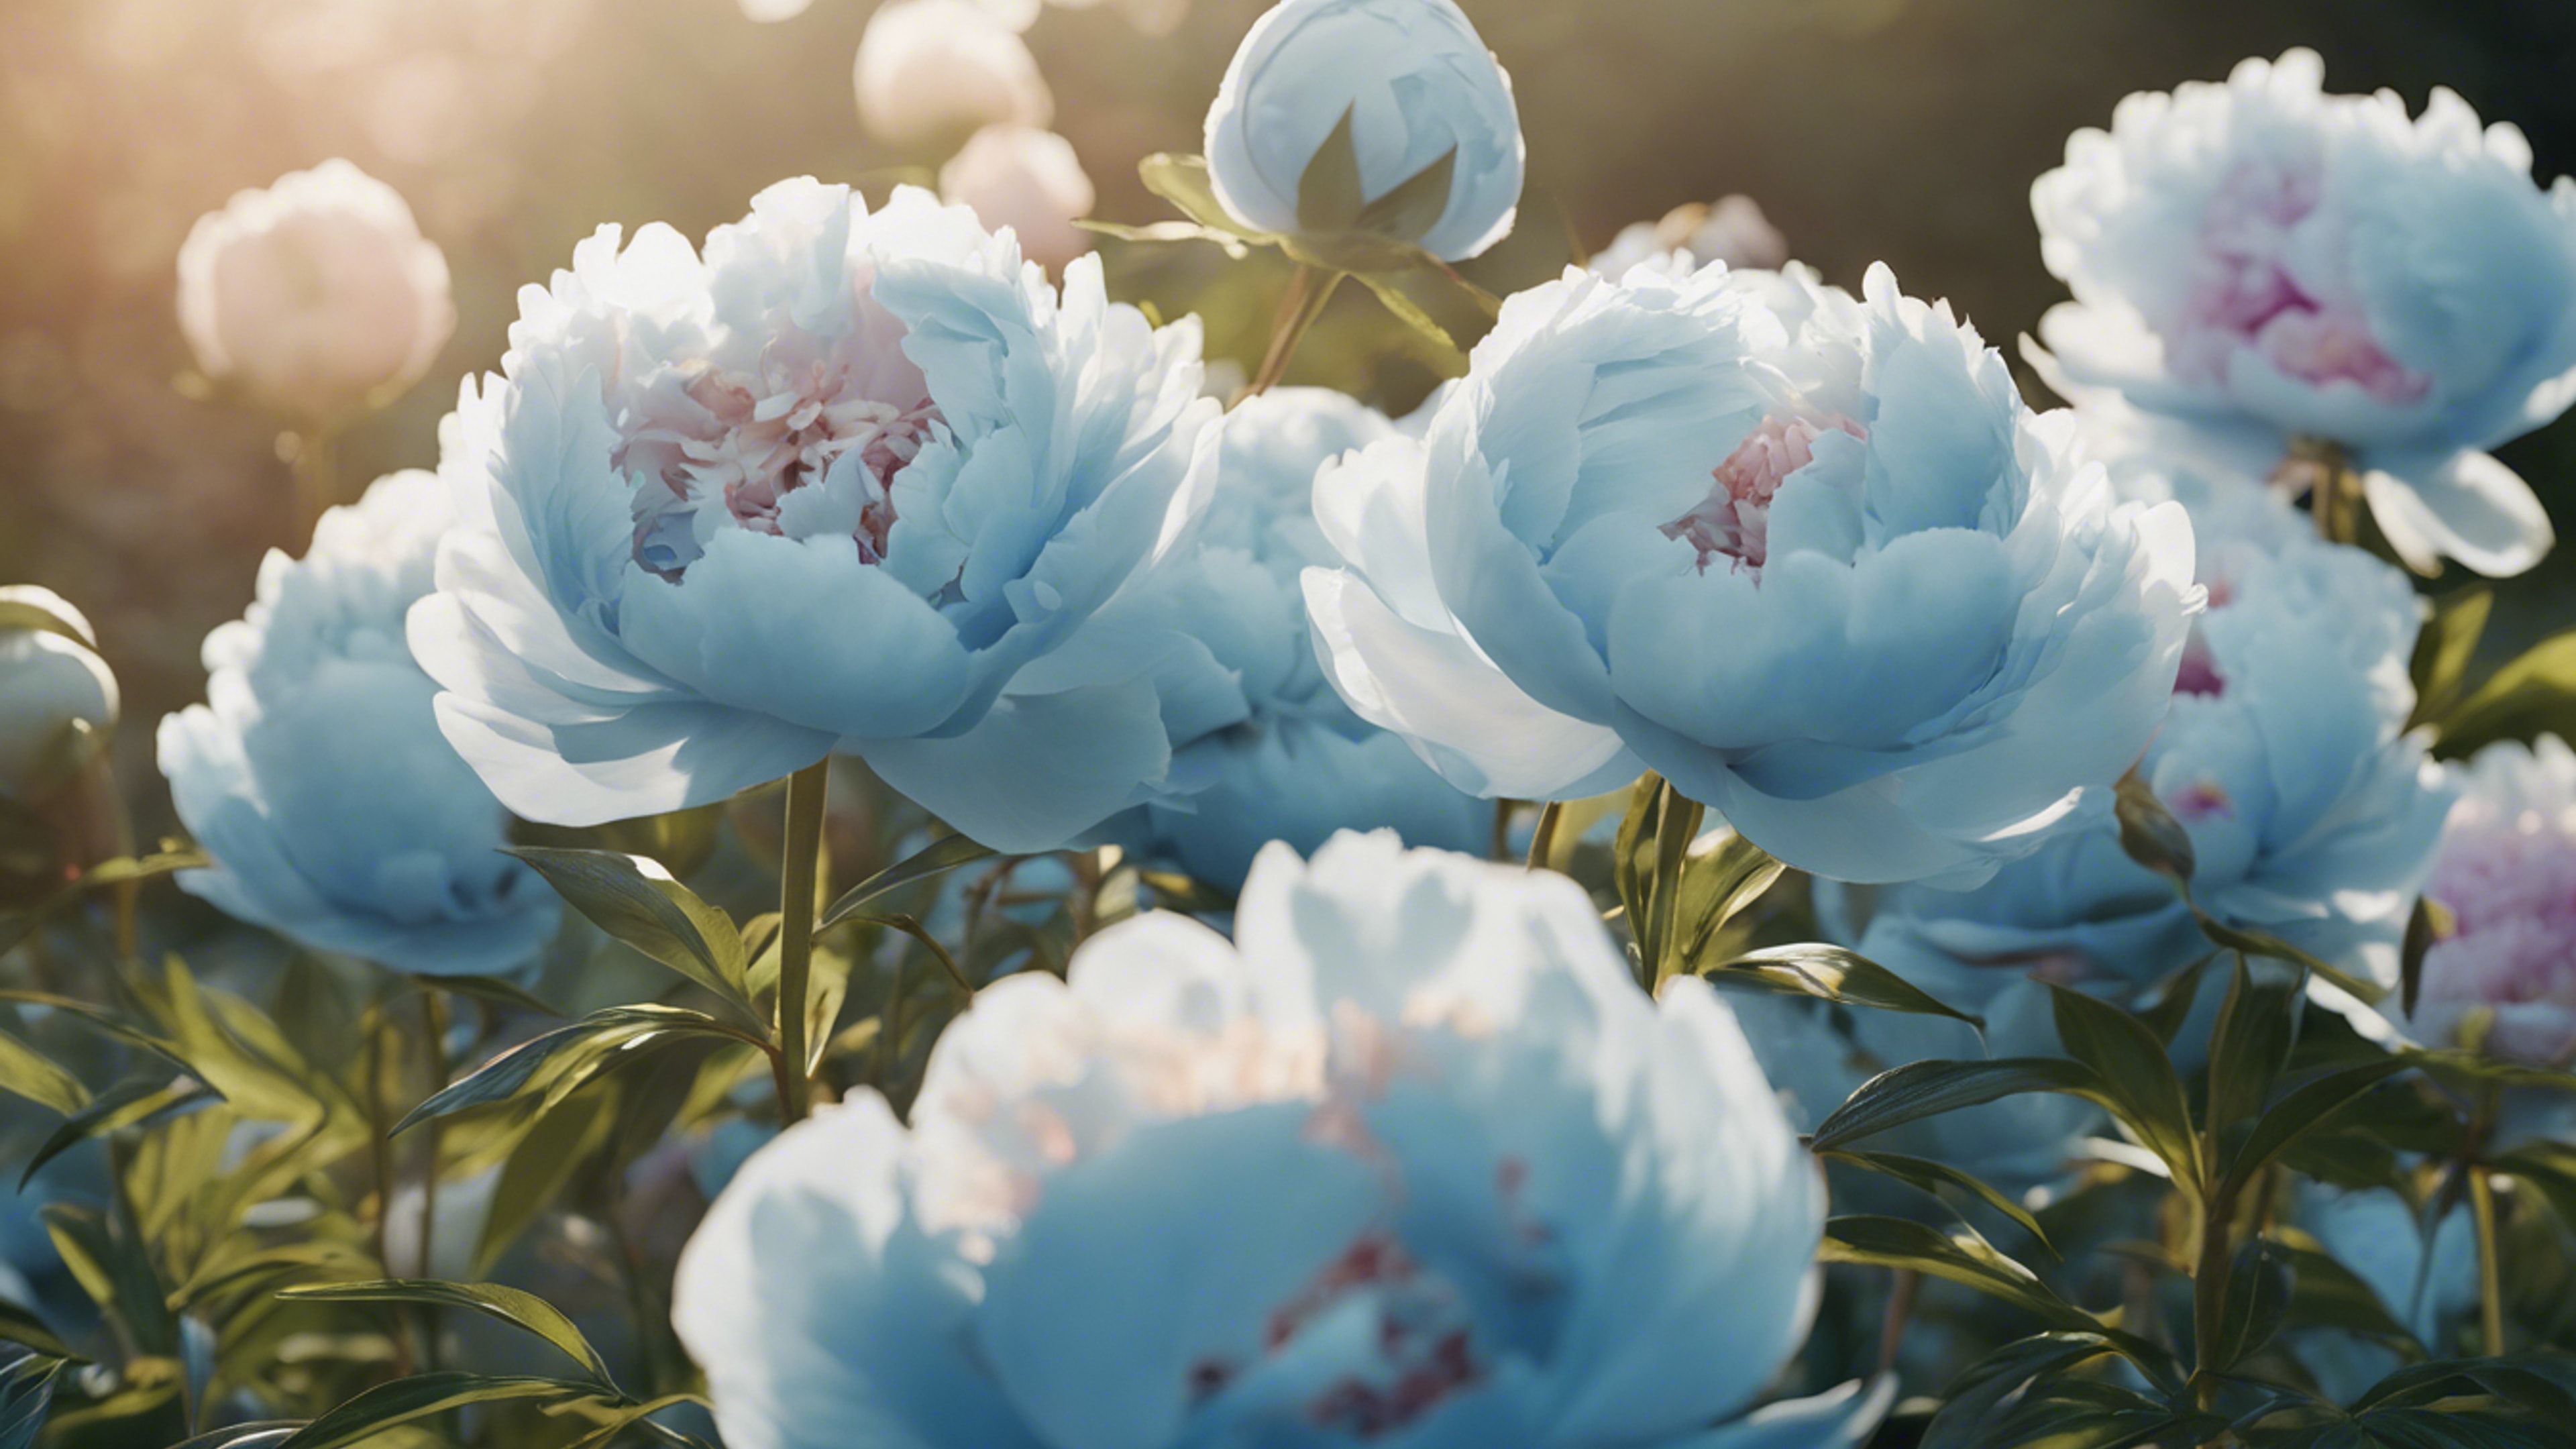 An array of pastel blue peonies blooming in a sunlit garden. Hình nền[bebed2869b0c4244859a]